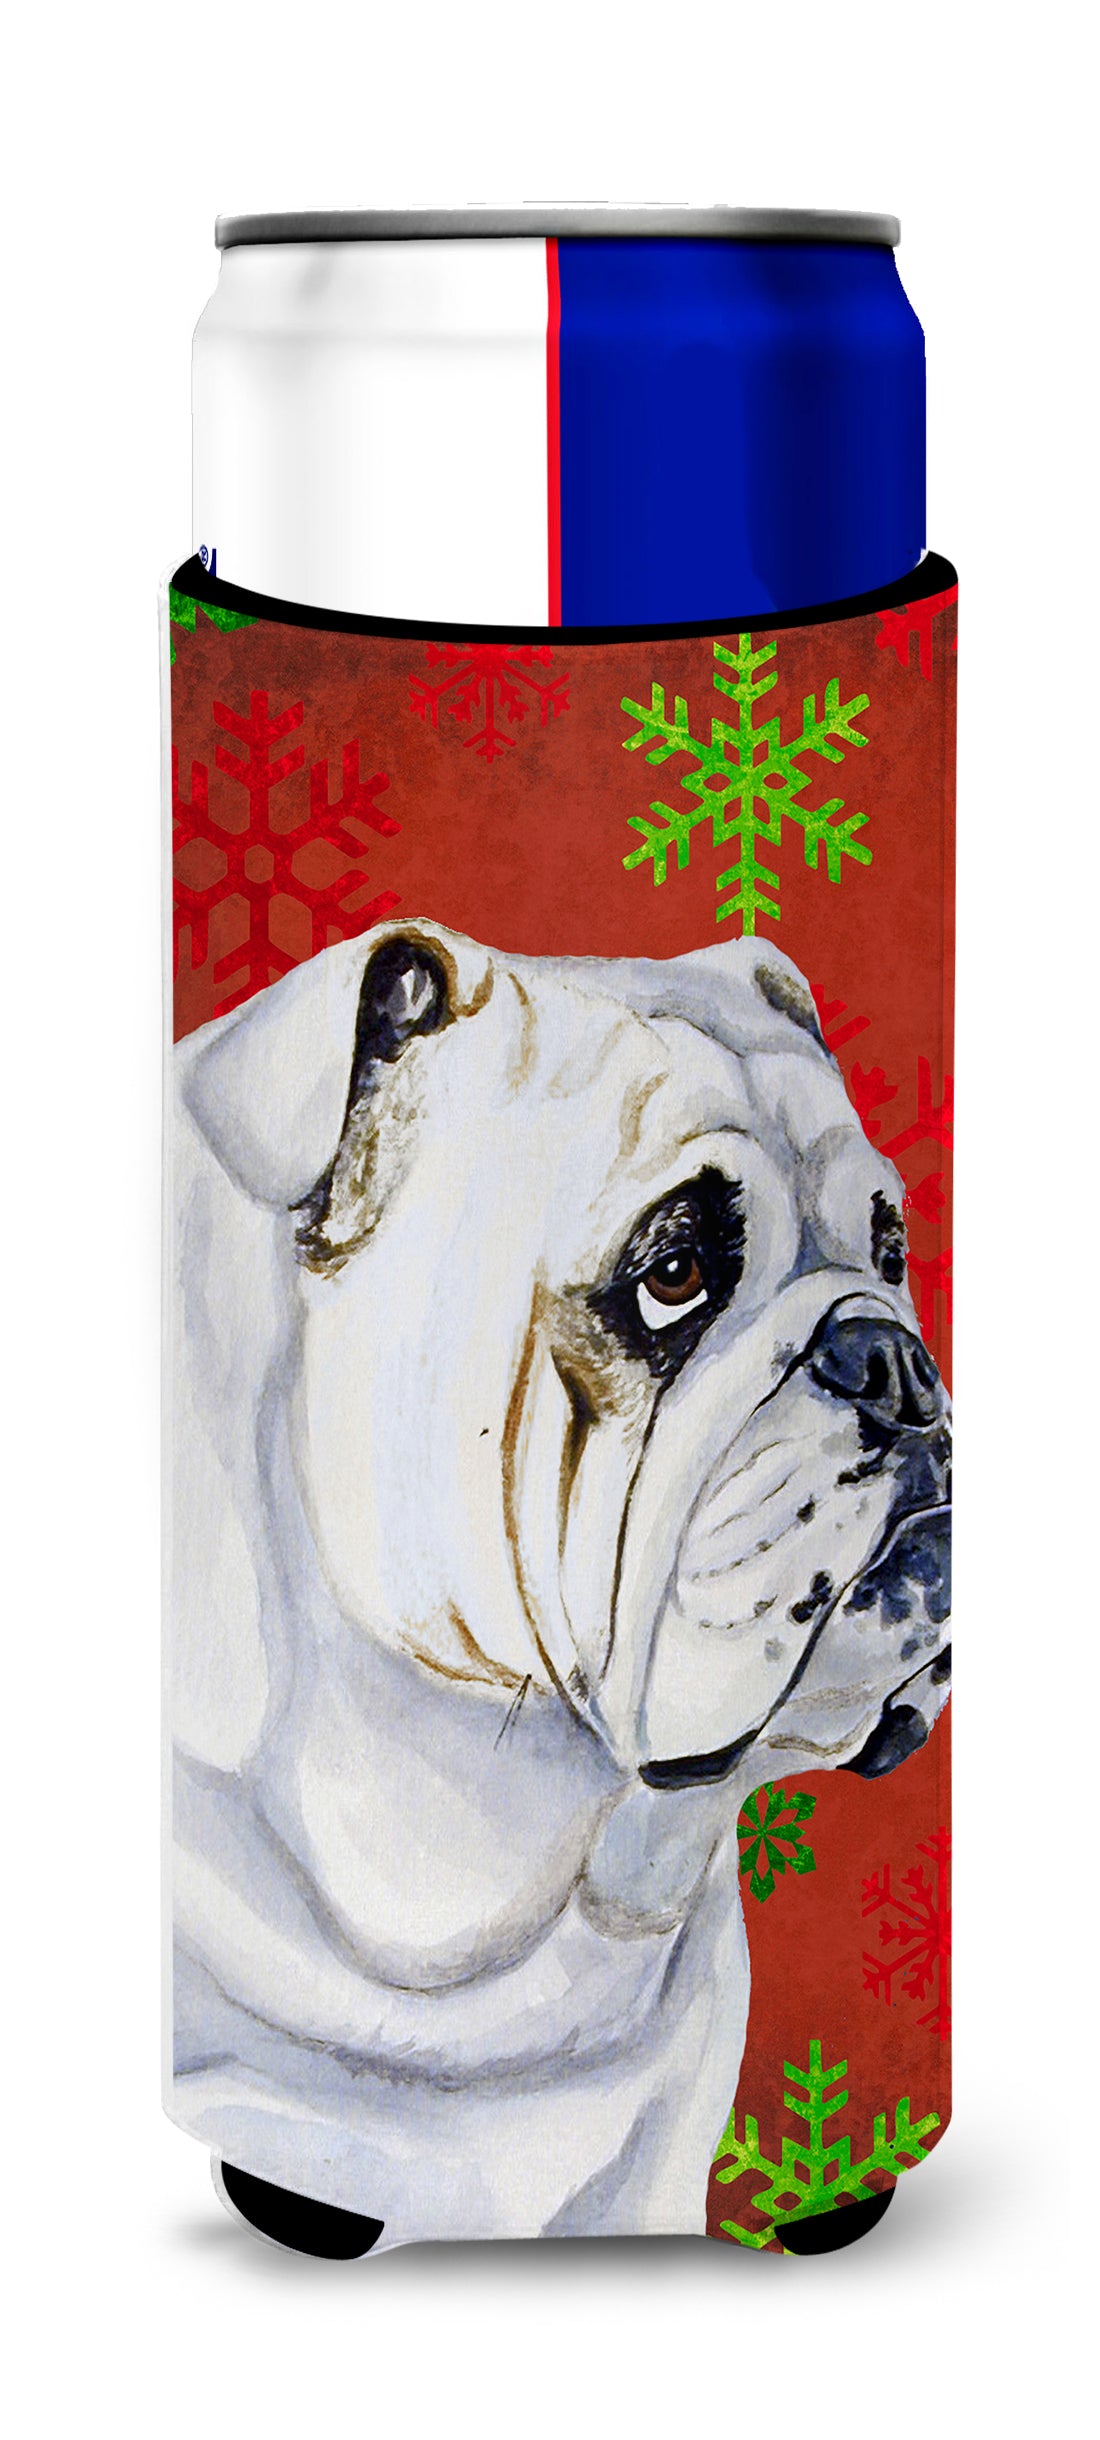 Bulldog English Red and Green Snowflakes Holiday Christmas Ultra Beverage Insulators for slim cans LH9319MUK